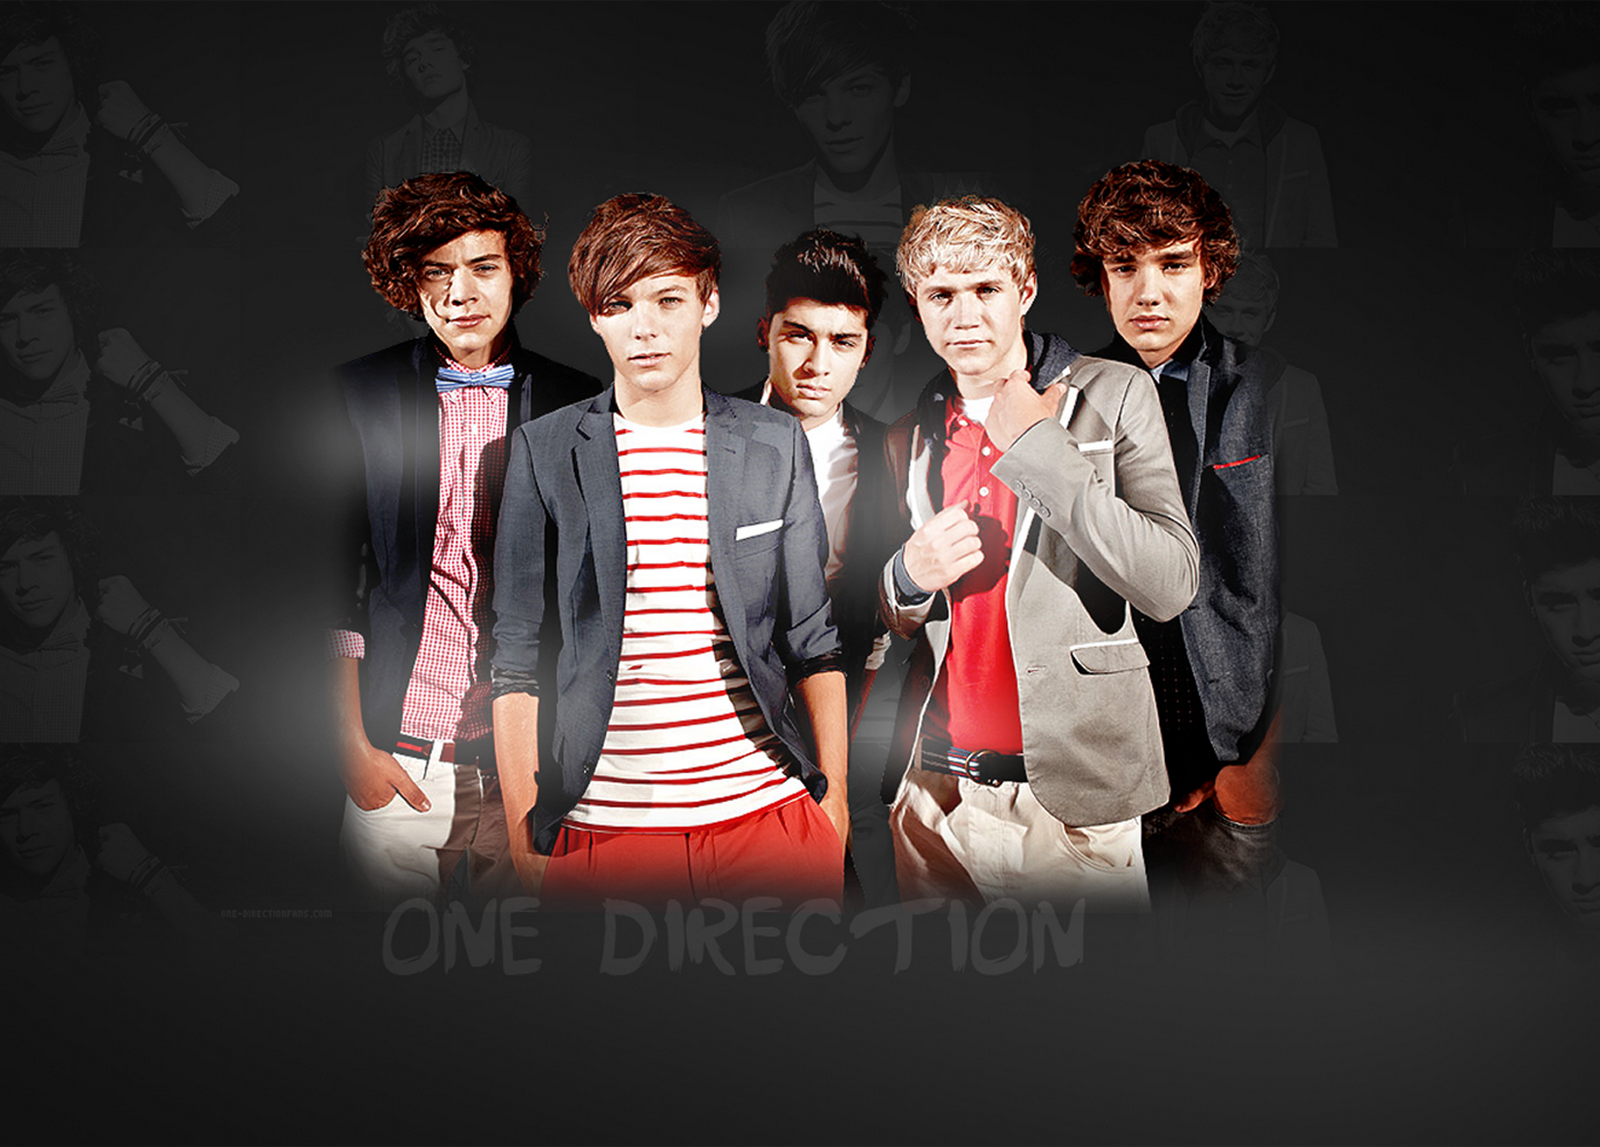 One Direction hd wallpapers Background HD Wallpaper for Desktop 1600x1147